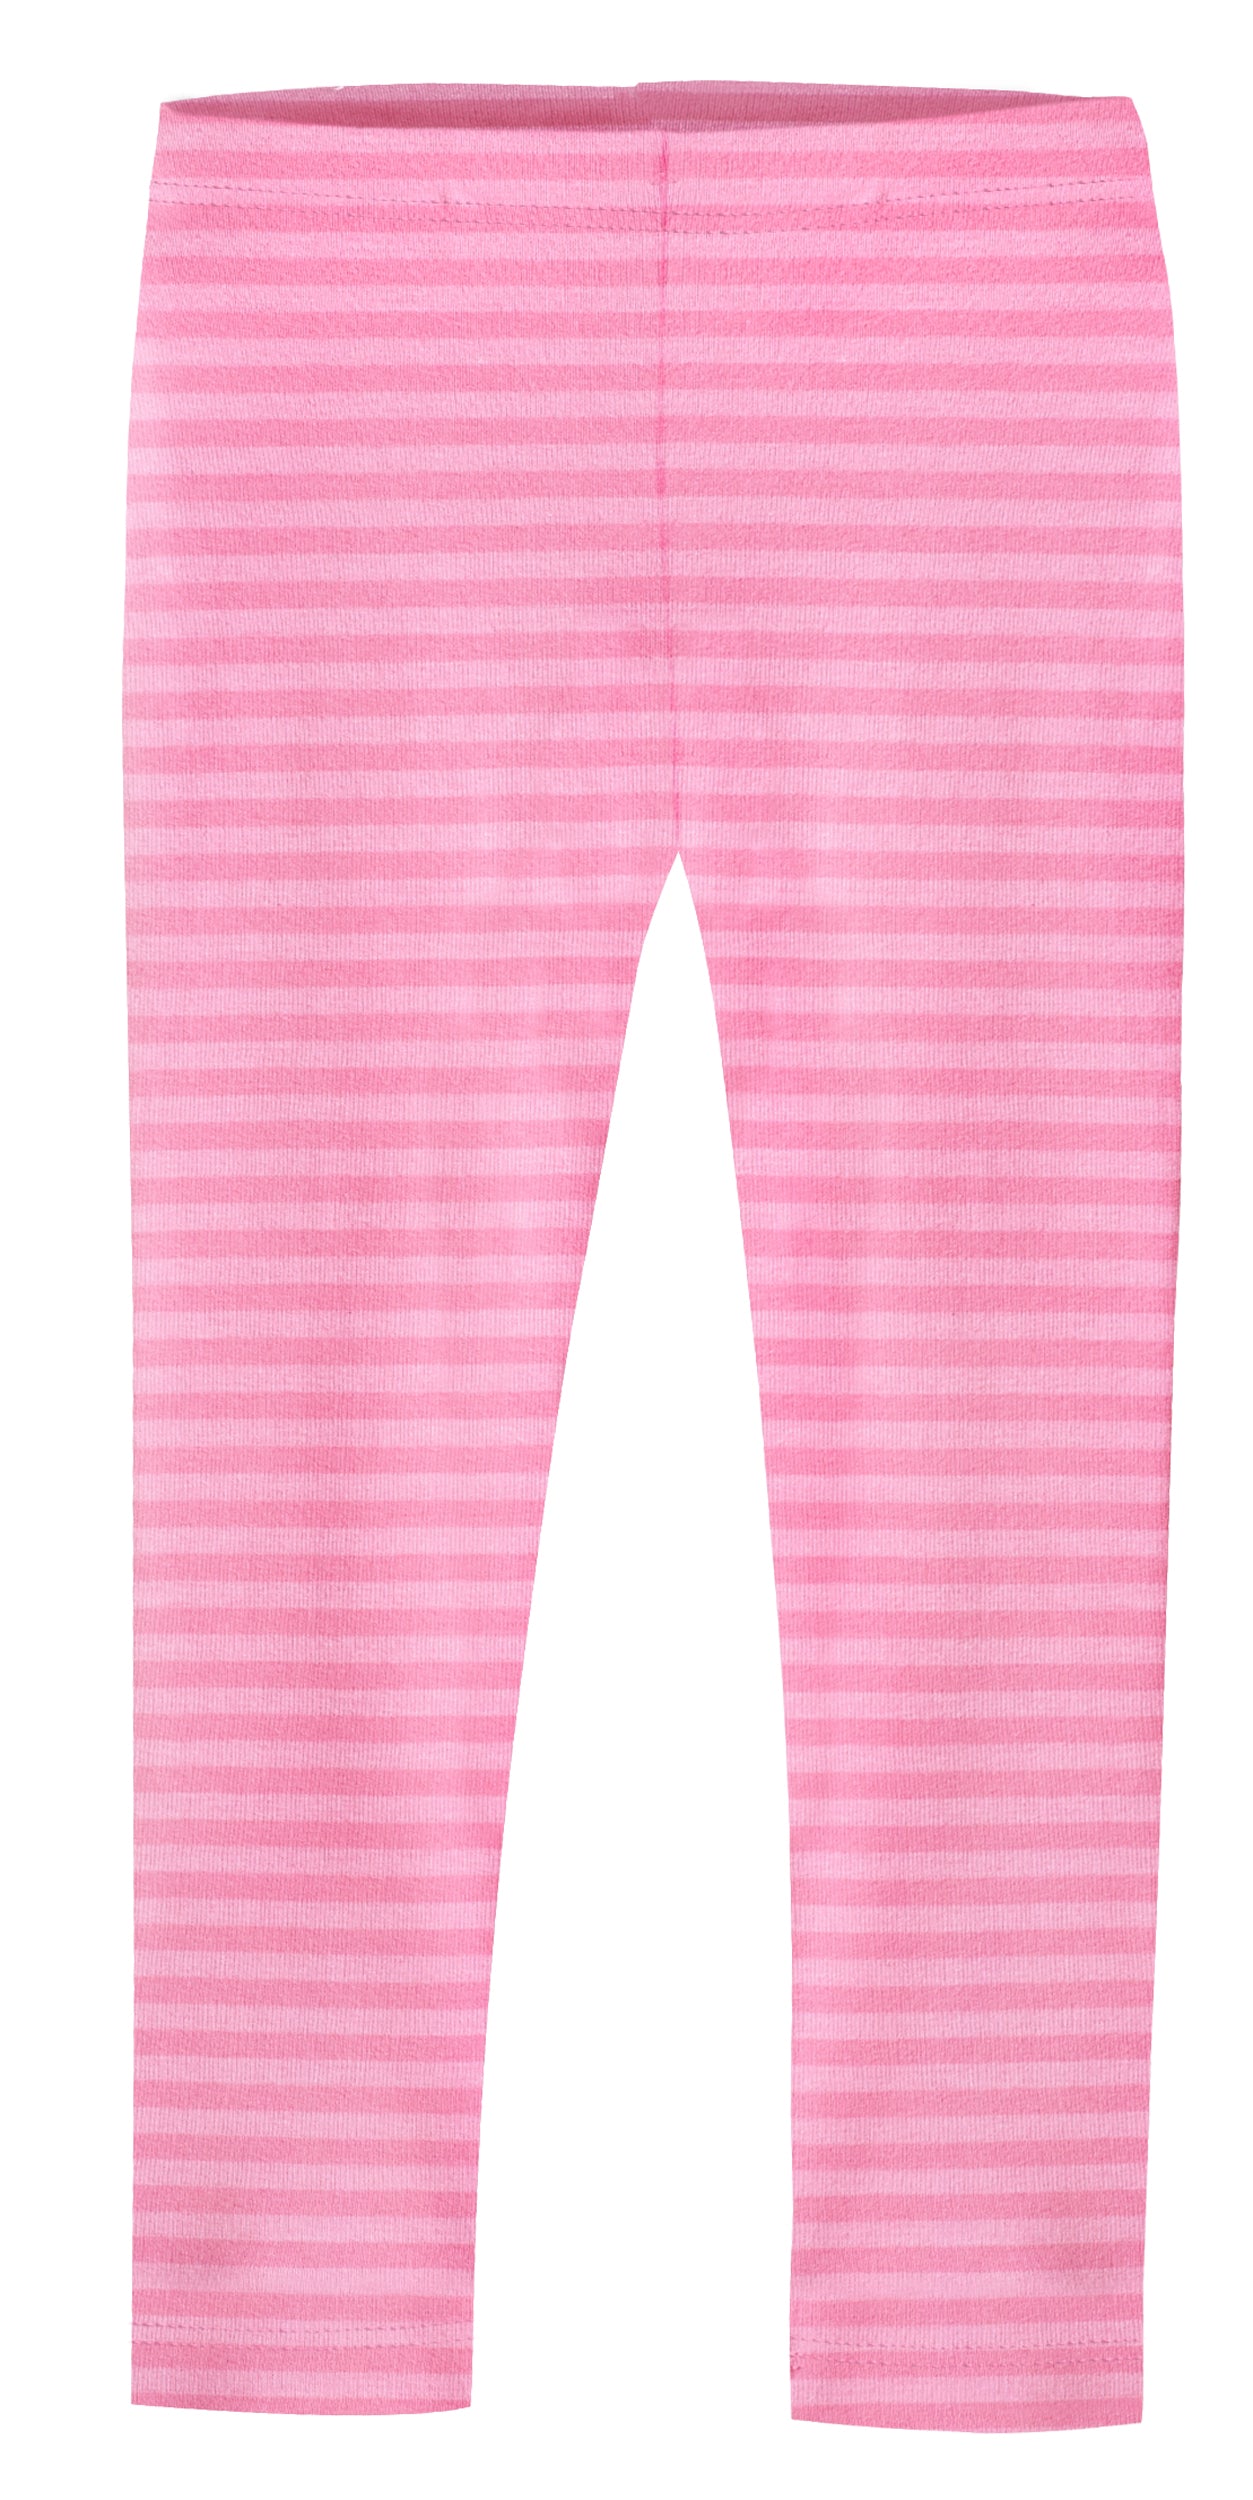 Match with you daughter in these cute black Striped Leggings with grey  stripes.